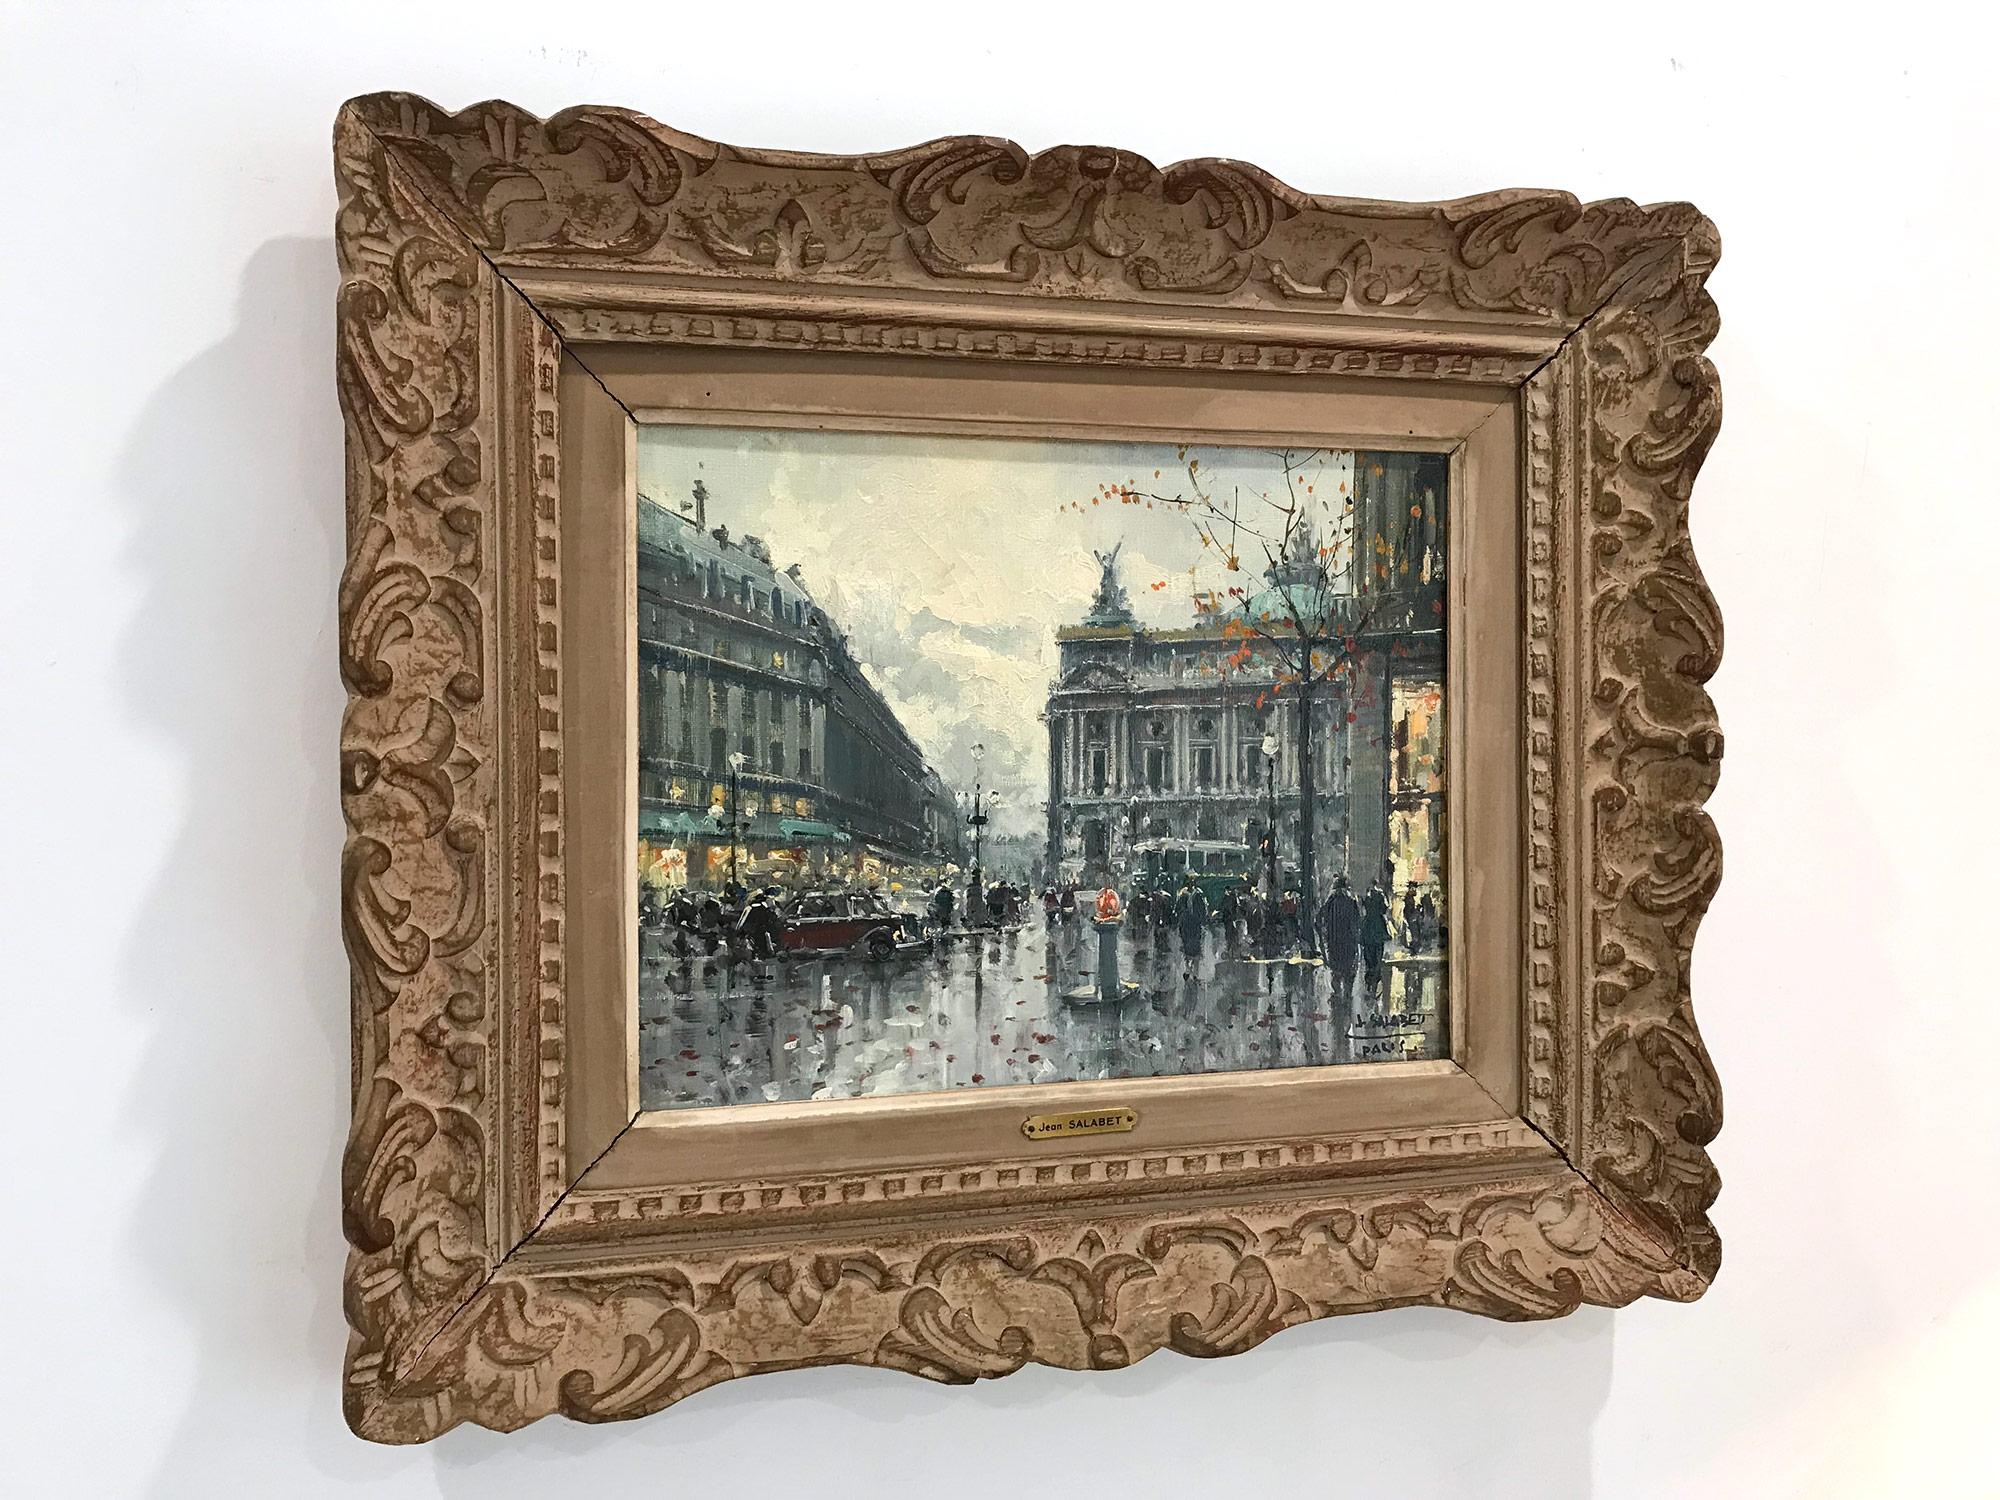 A beautiful oil on canvas painting by the French artist, Jean Salabet. Salabet was a Parisian painter known for his colorful cityscapes depicting the times of his generation. His work is comparable to those of Jules Herve, Antoine Blanchard, and